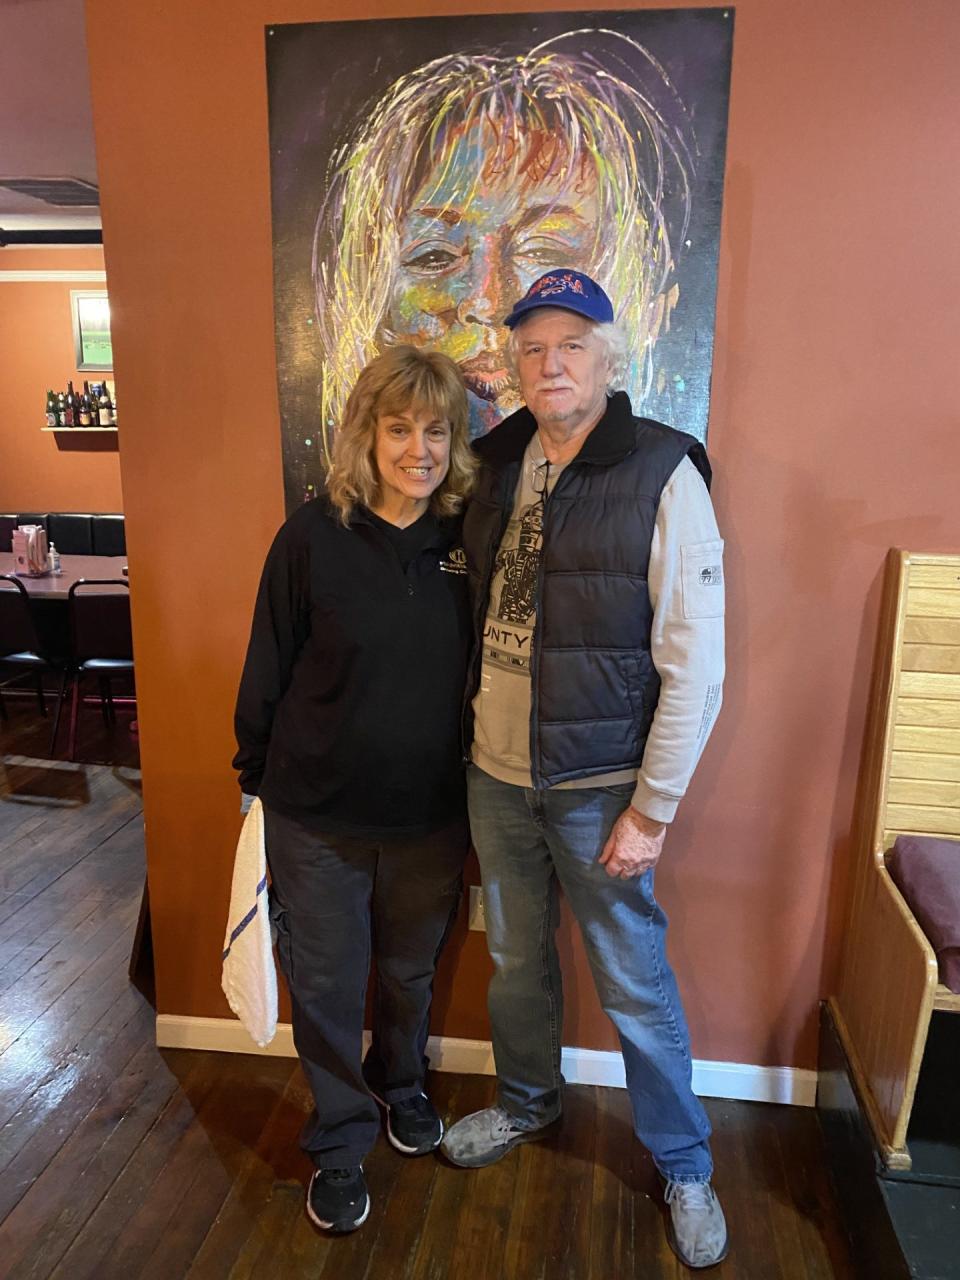 Joe and Tammy Carey, owners of Carey’s Brewhouse at 58 Bridge St. in Corning, try to find a few minutes to celebrate Valentine's Day while welcoming many customers to the business on the special day.